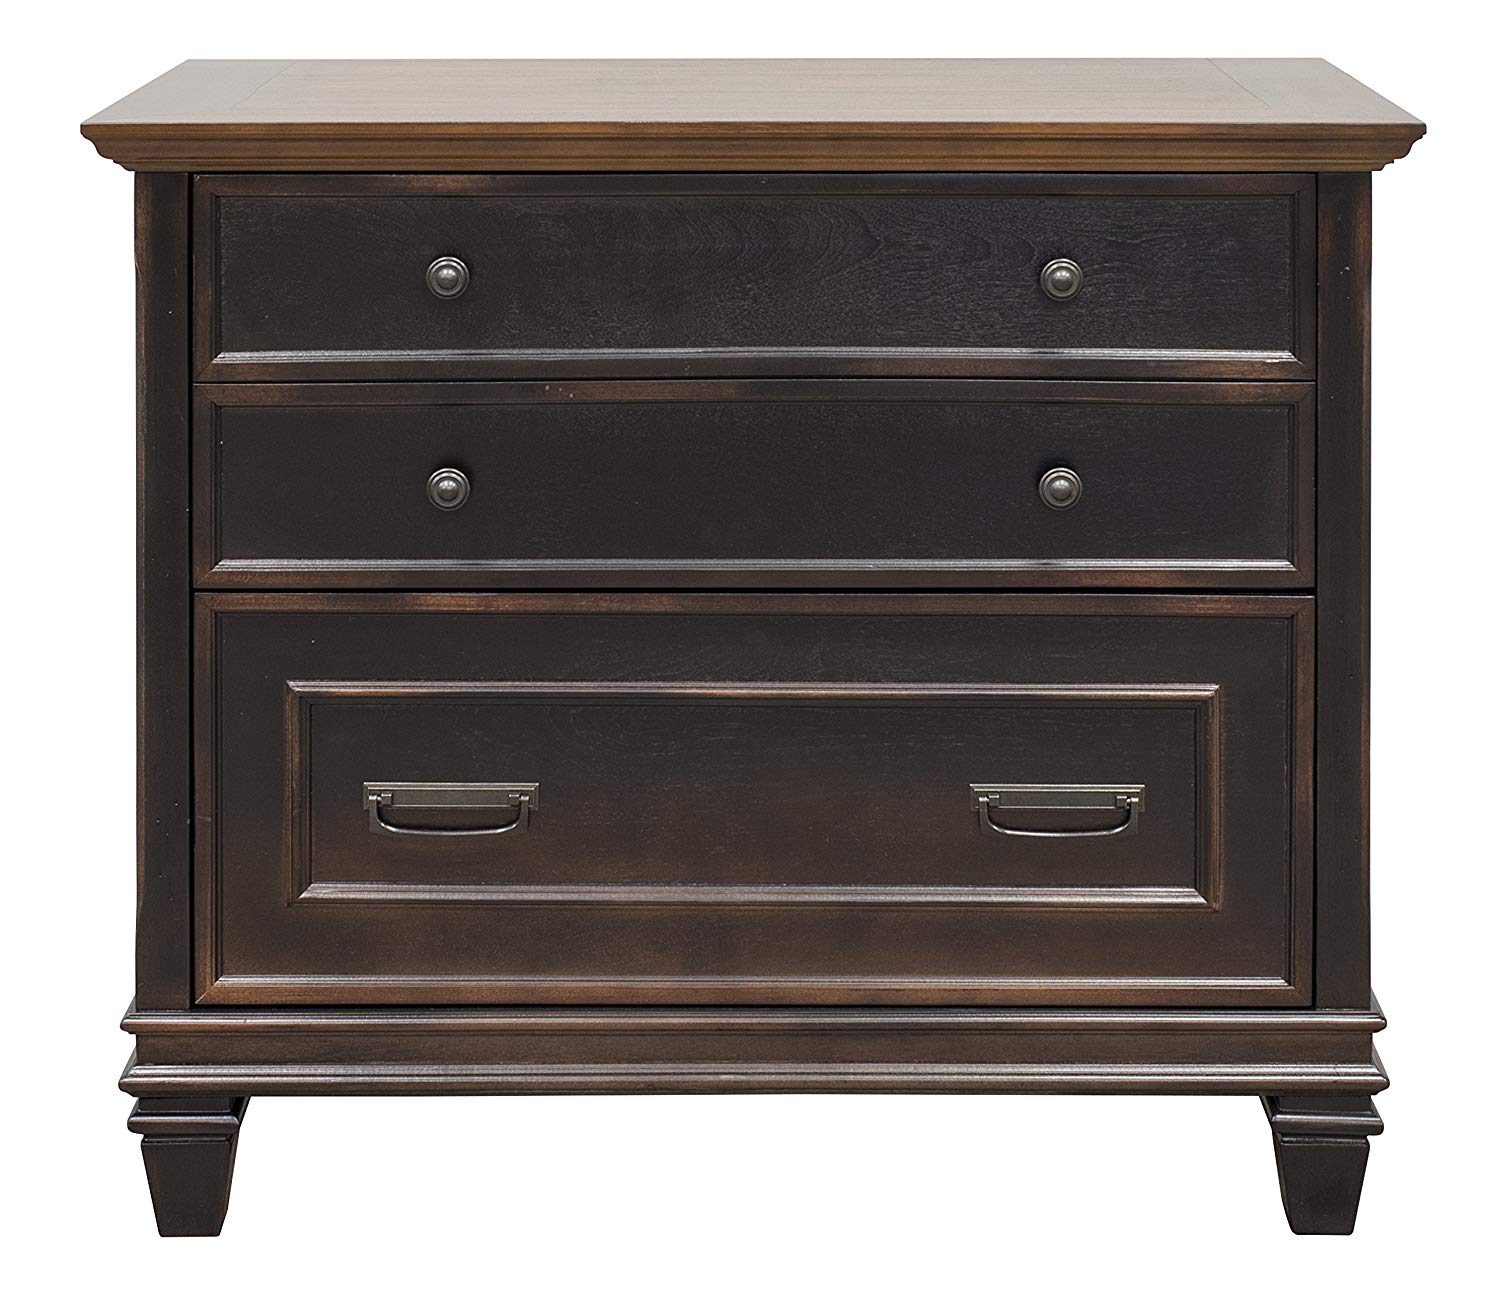 martin furniture hartford lateral file cabinet brown accent table fully assembled kitchen dining chest end antique oval battery light adjustable metal legs white marble top coffee